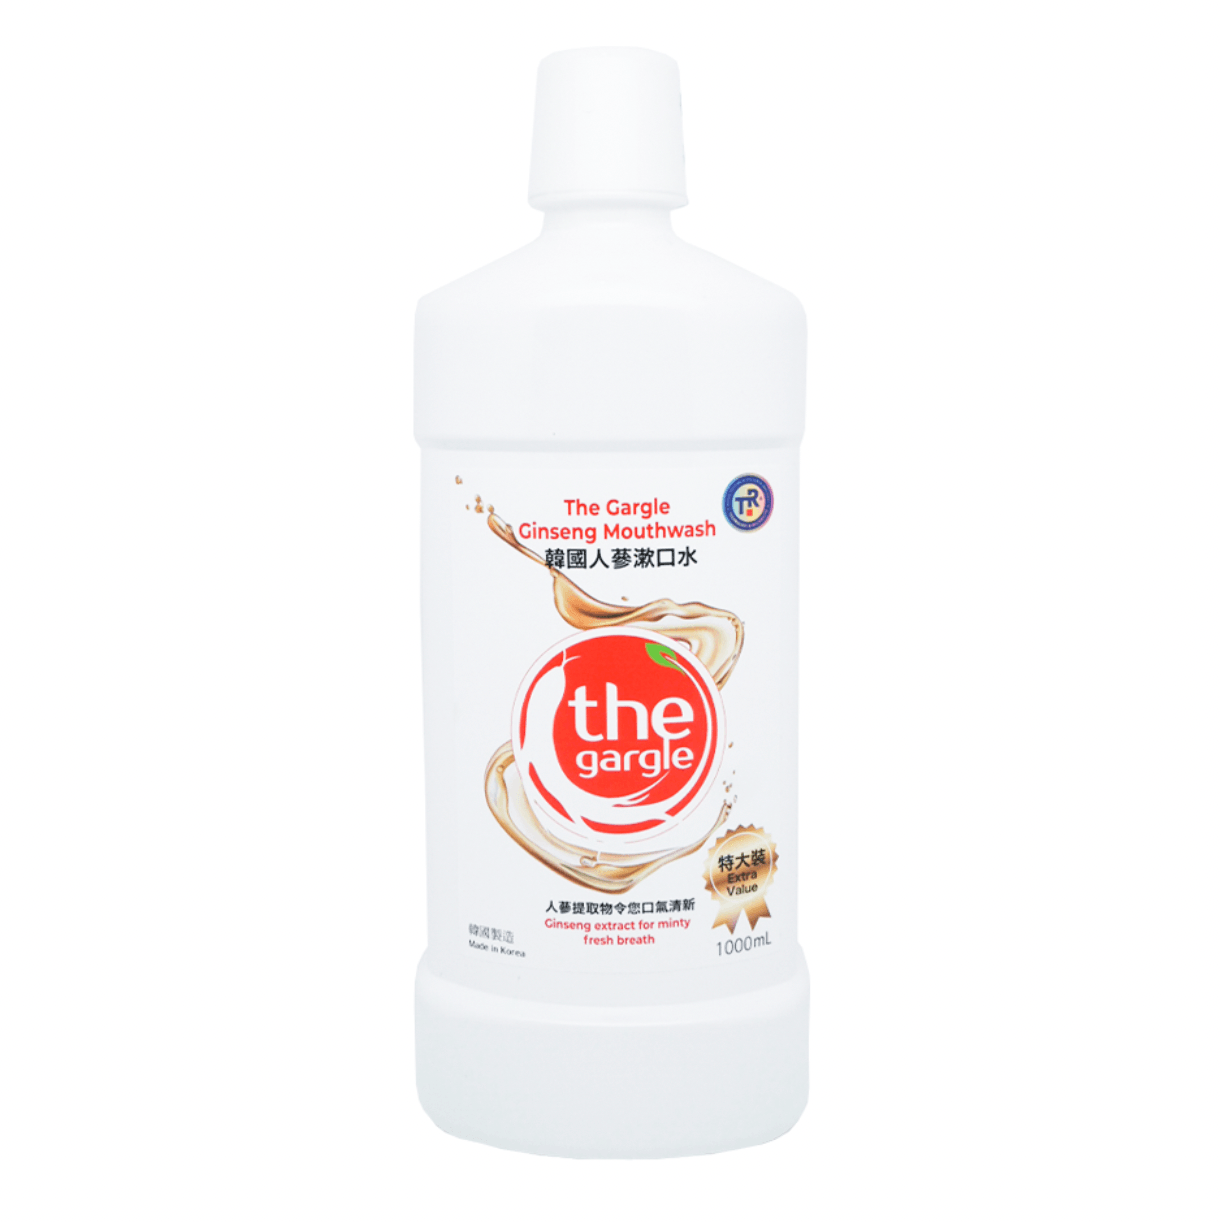 [Extra Value] the gargle 99.9% Sterilization Korean Ginseng Flavored Mouthwash 1000ml Liquid Mouth Freshner - LMCHING Group Limited